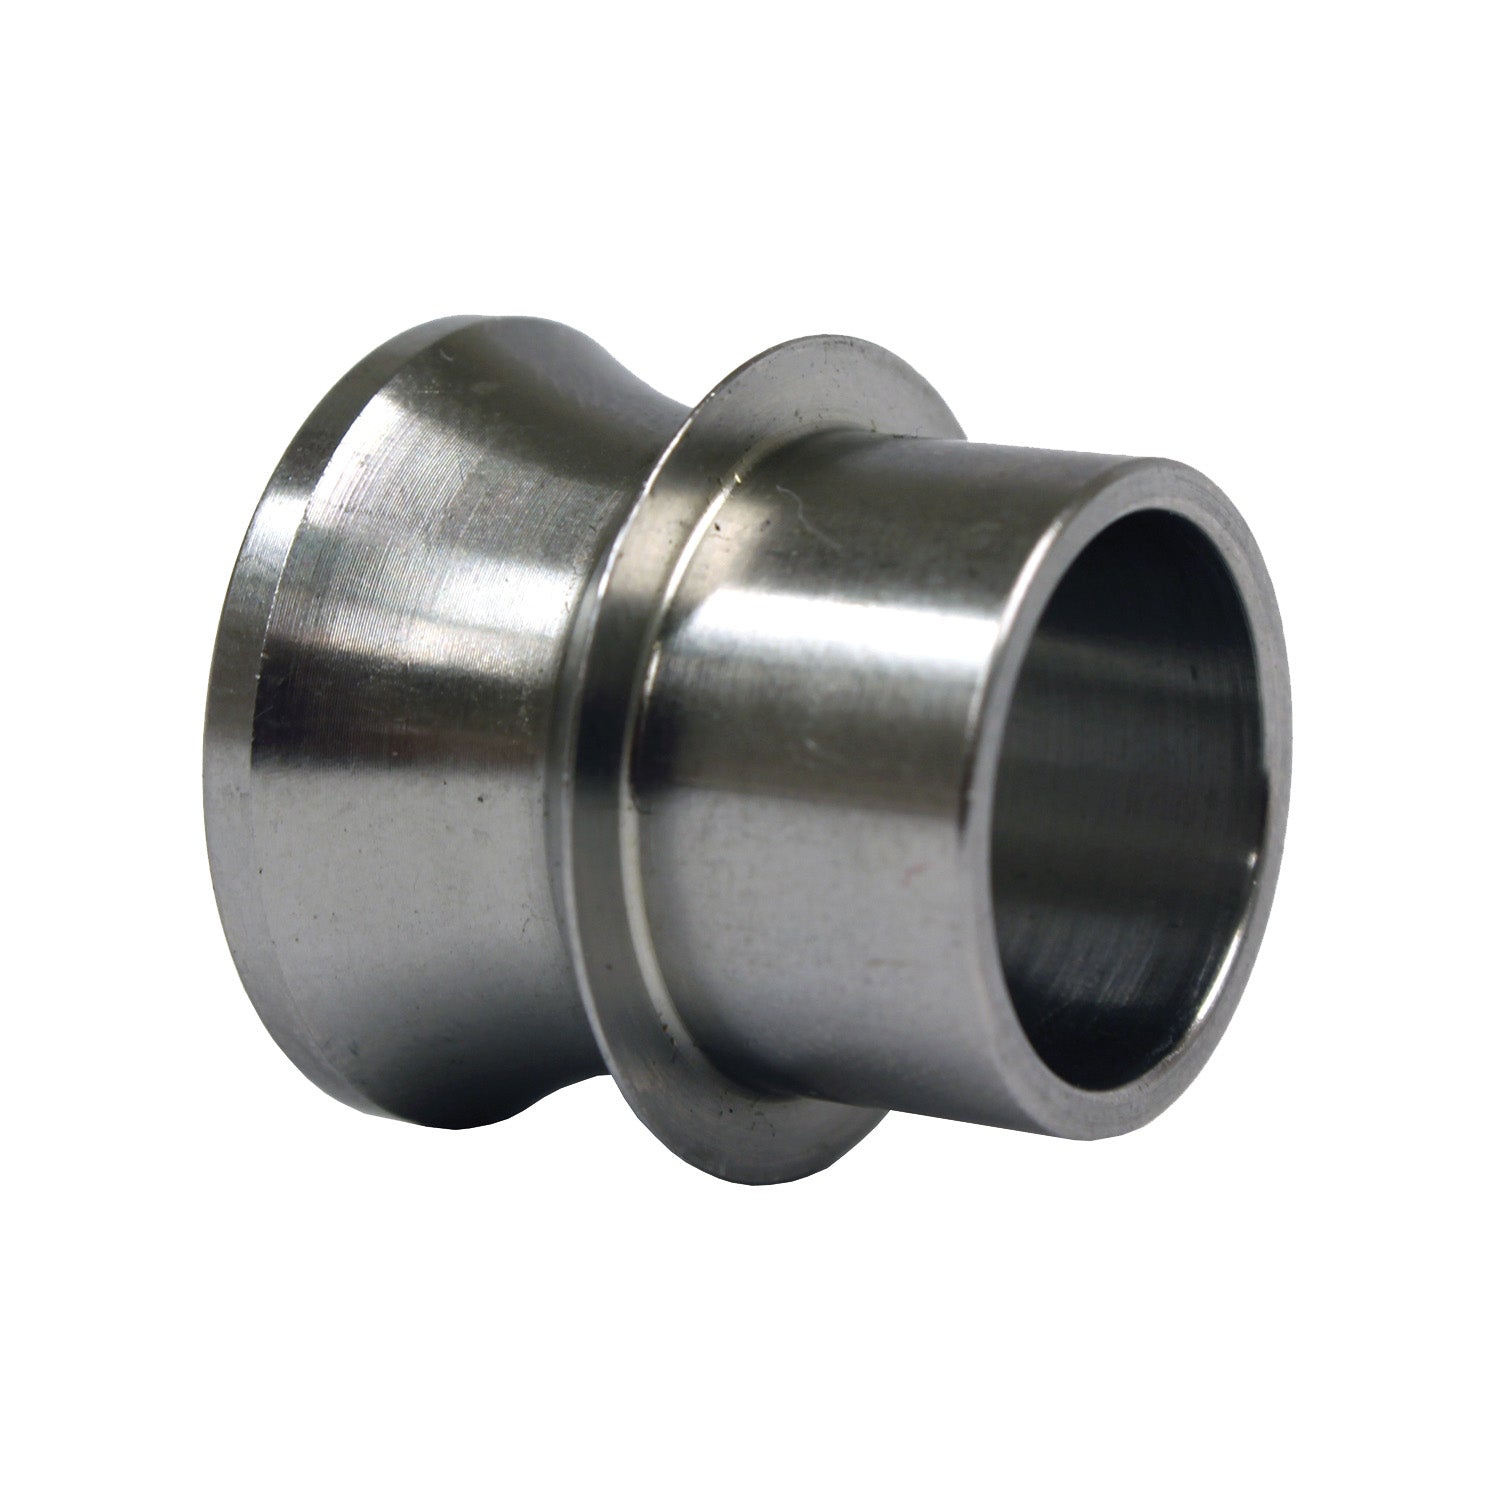 QA1 SN14-89 High Misalignment Spacer, .875 inch Od Ss, .5 inch X 2 inch Total Width